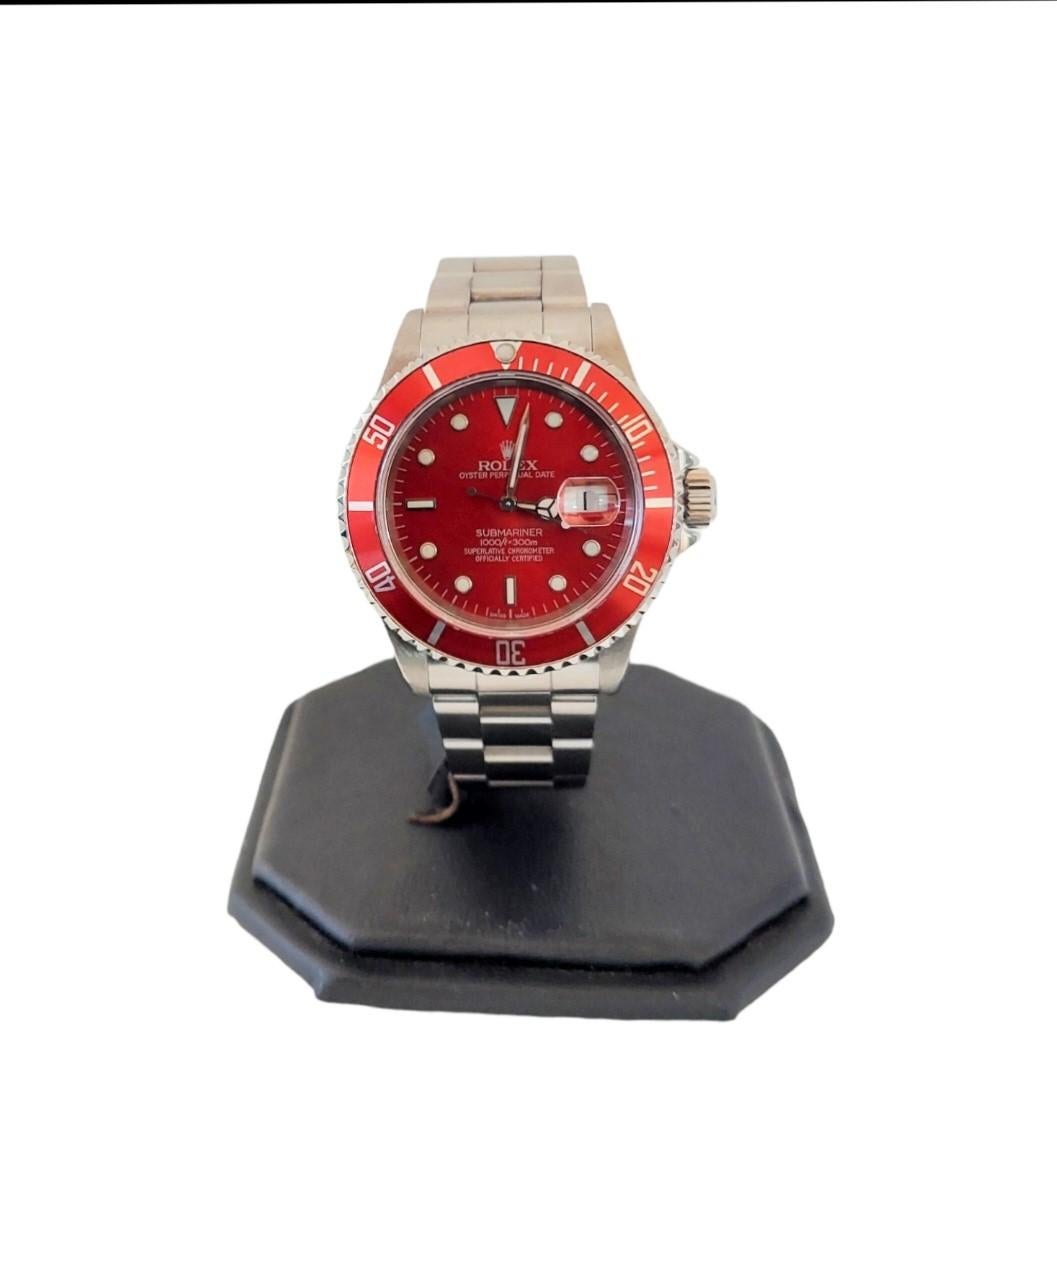 (Watch Description)
Brand - Rolex
Condition - Preowned 
Model - 16610 Submariner 
Case size - 41mm
Dial - Custom red Sub
Bezel - Rotating steel Red
Crystal - Sapphire 
Movement - Rolex Cal-3135 
Wrist band - Oyster Steel 
Wrist size - 8 inches 

